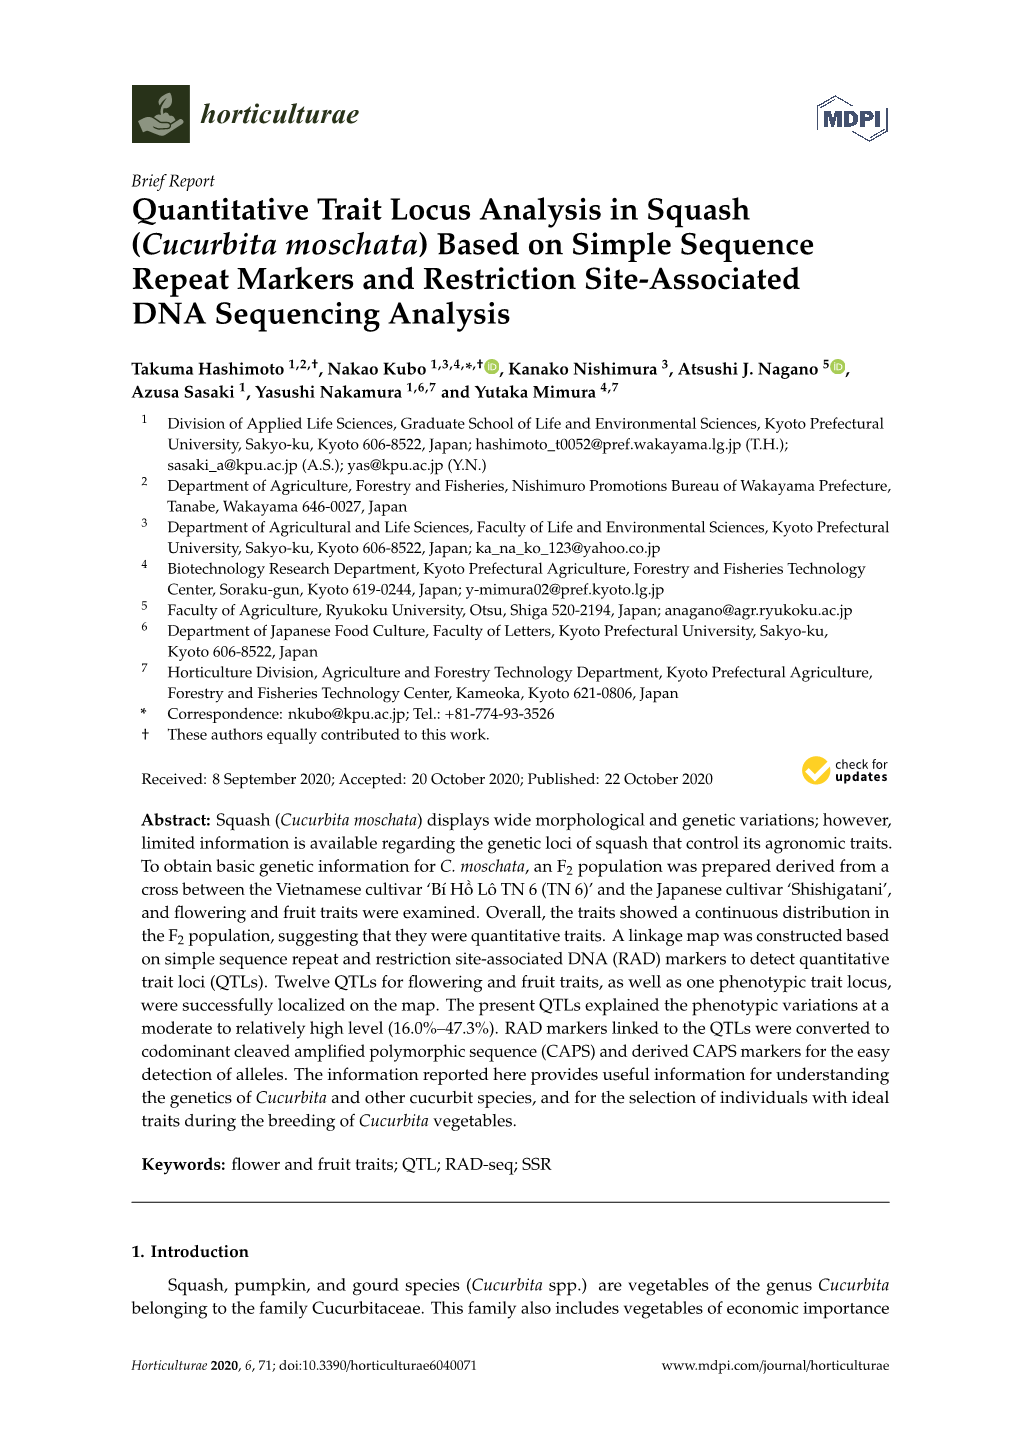 Quantitative Trait Locus Analysis in Squash (Cucurbita Moschata) Based on Simple Sequence Repeat Markers and Restriction Site-Associated DNA Sequencing Analysis